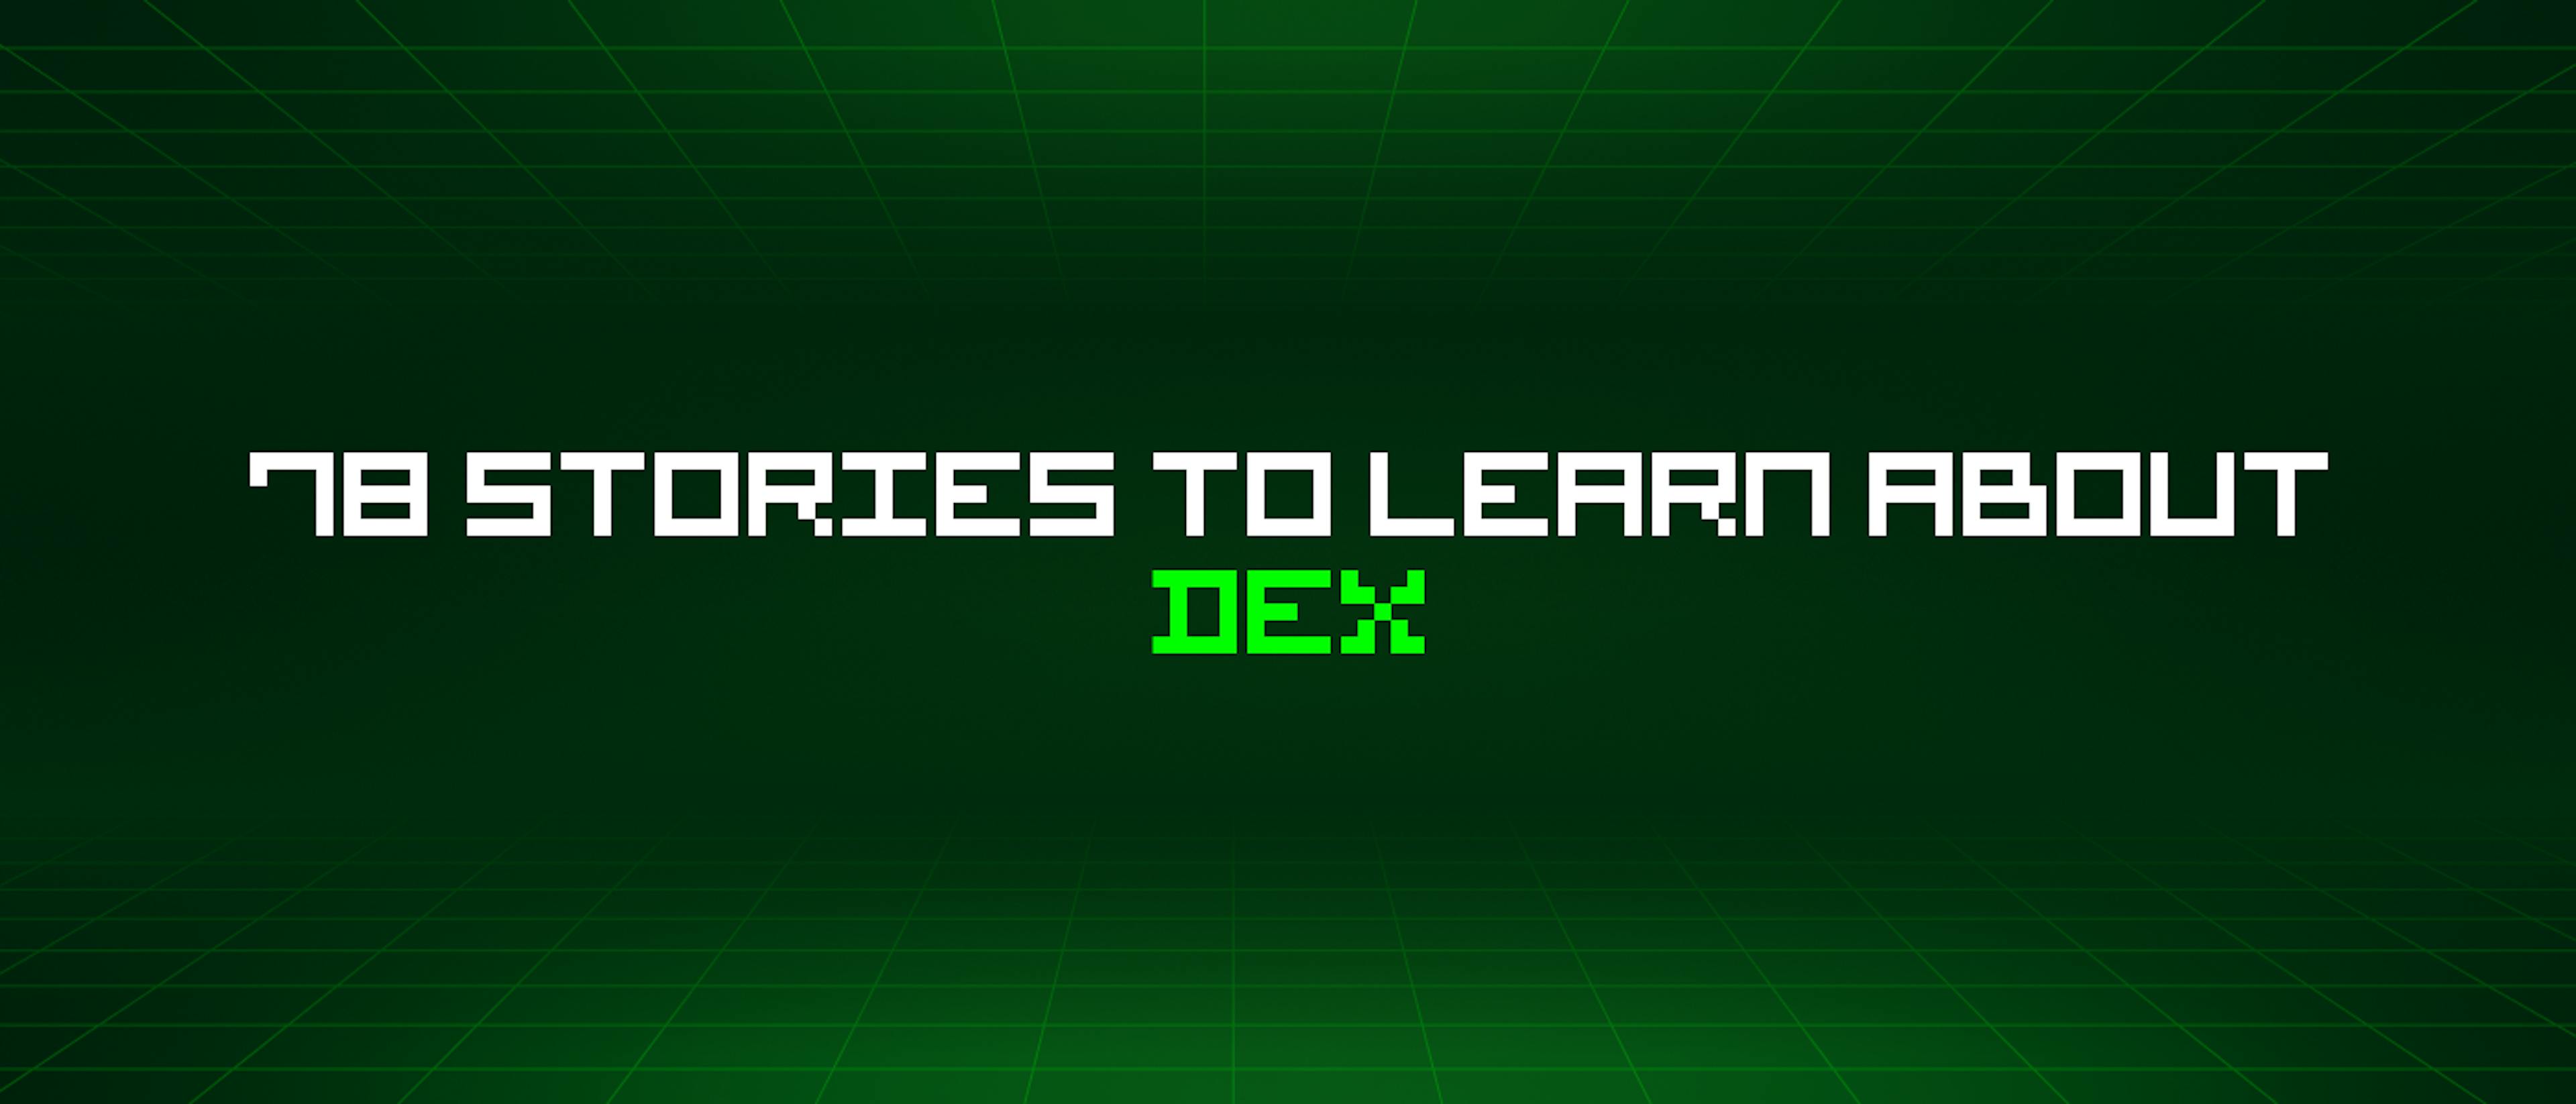 featured image - 78 Stories To Learn About Dex